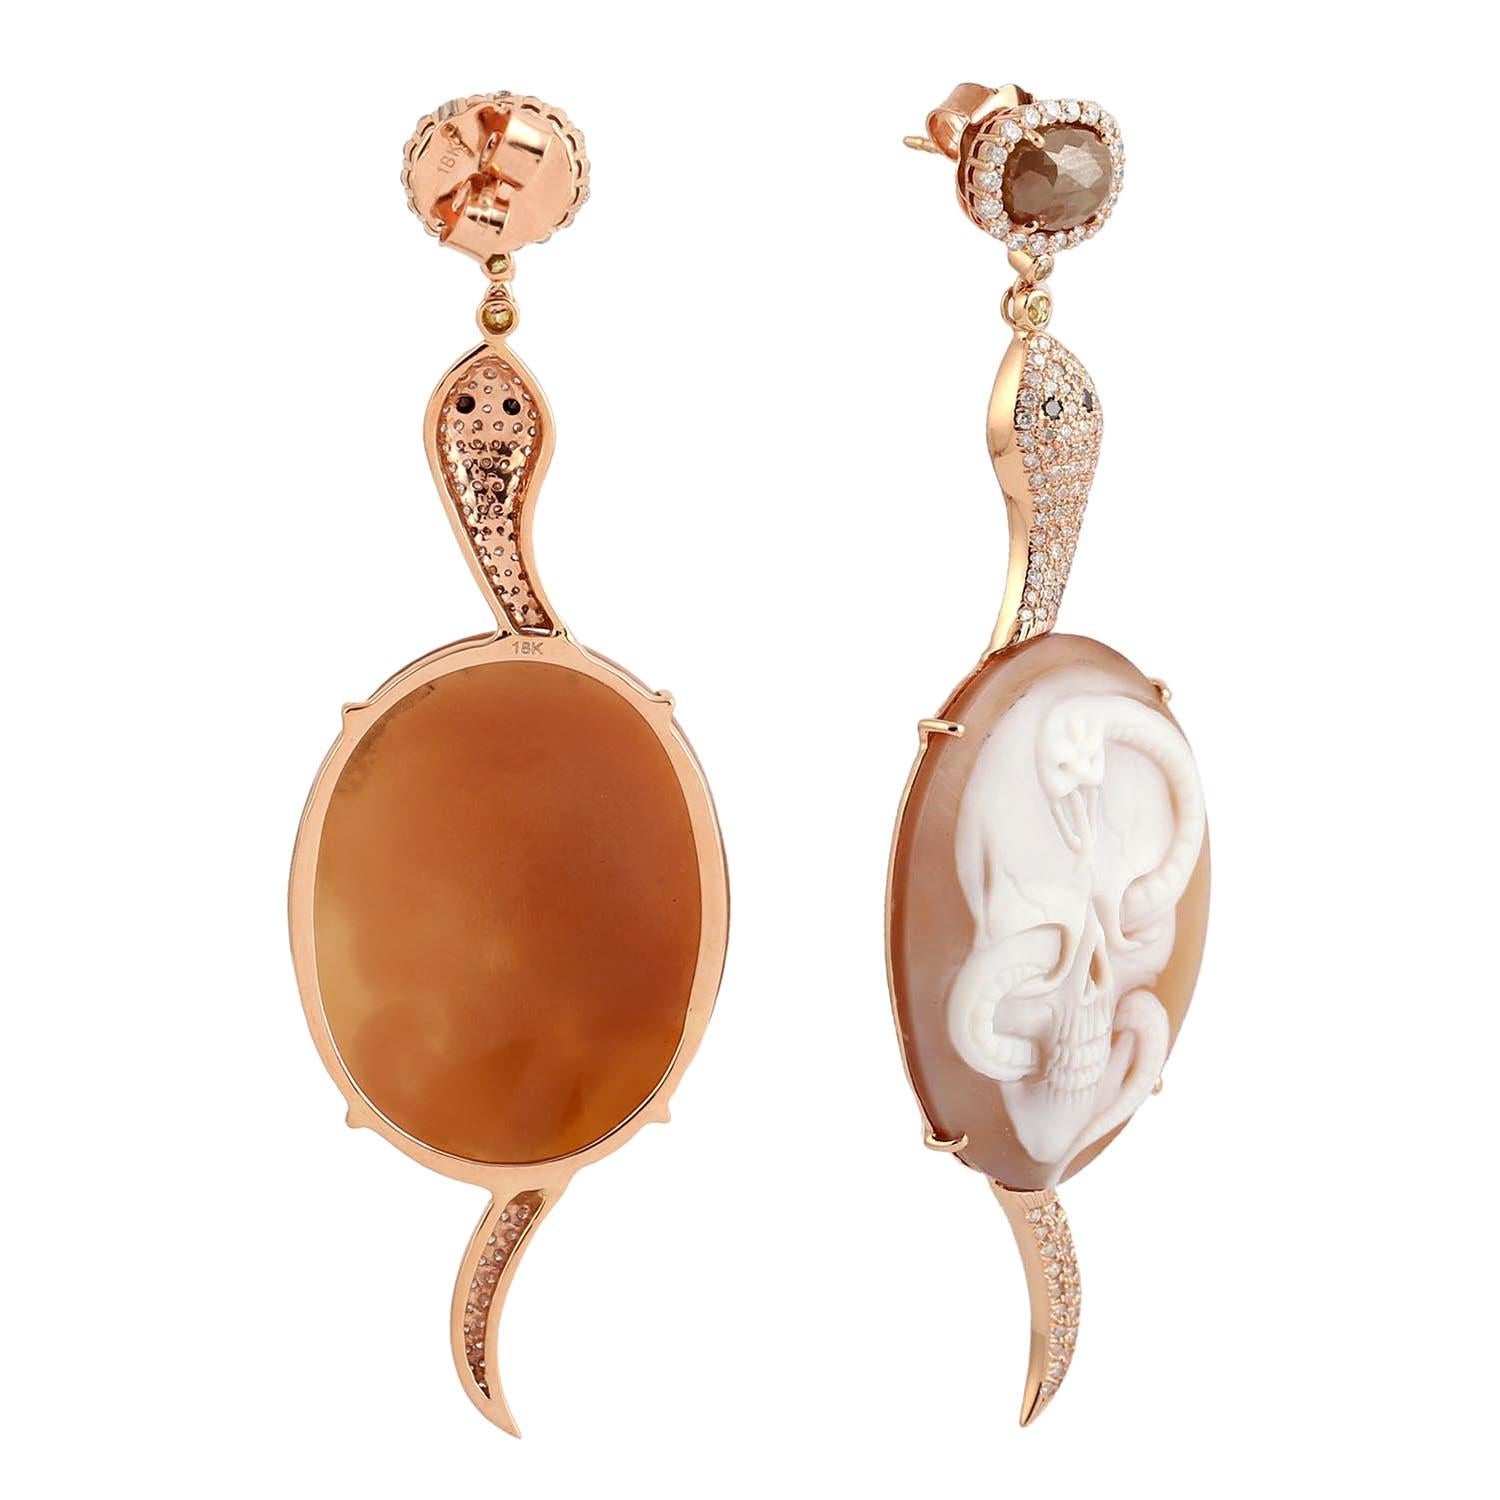 Mixed Cut Carved Snake & Skull On Sardonyx Earring With Diamonds In 18k Rose Gold For Sale